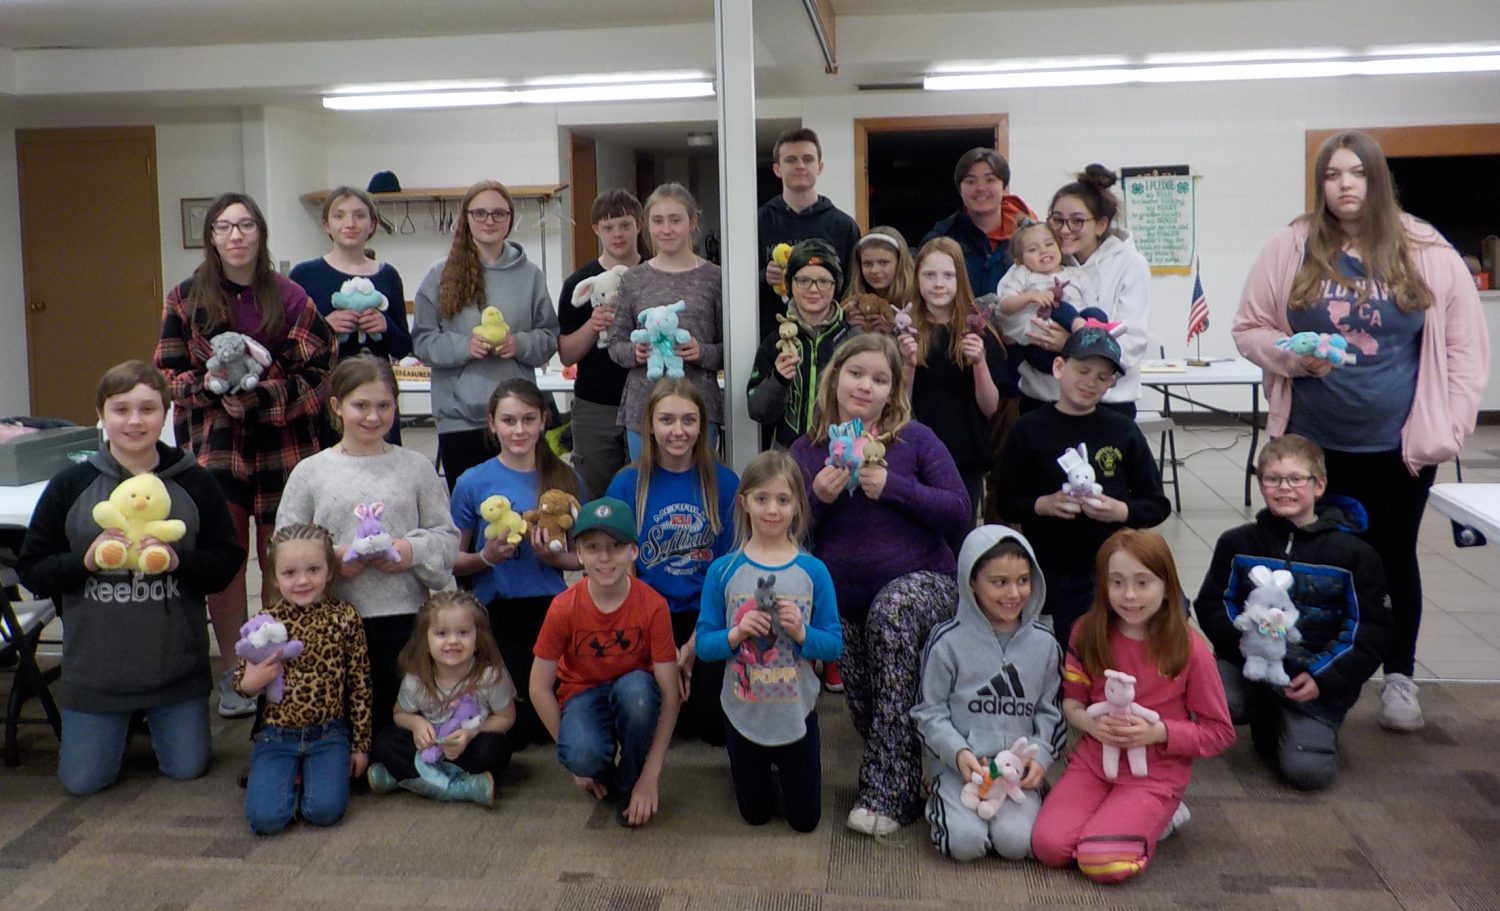 Busy Bees collect stuffed animals for area nursing home residents